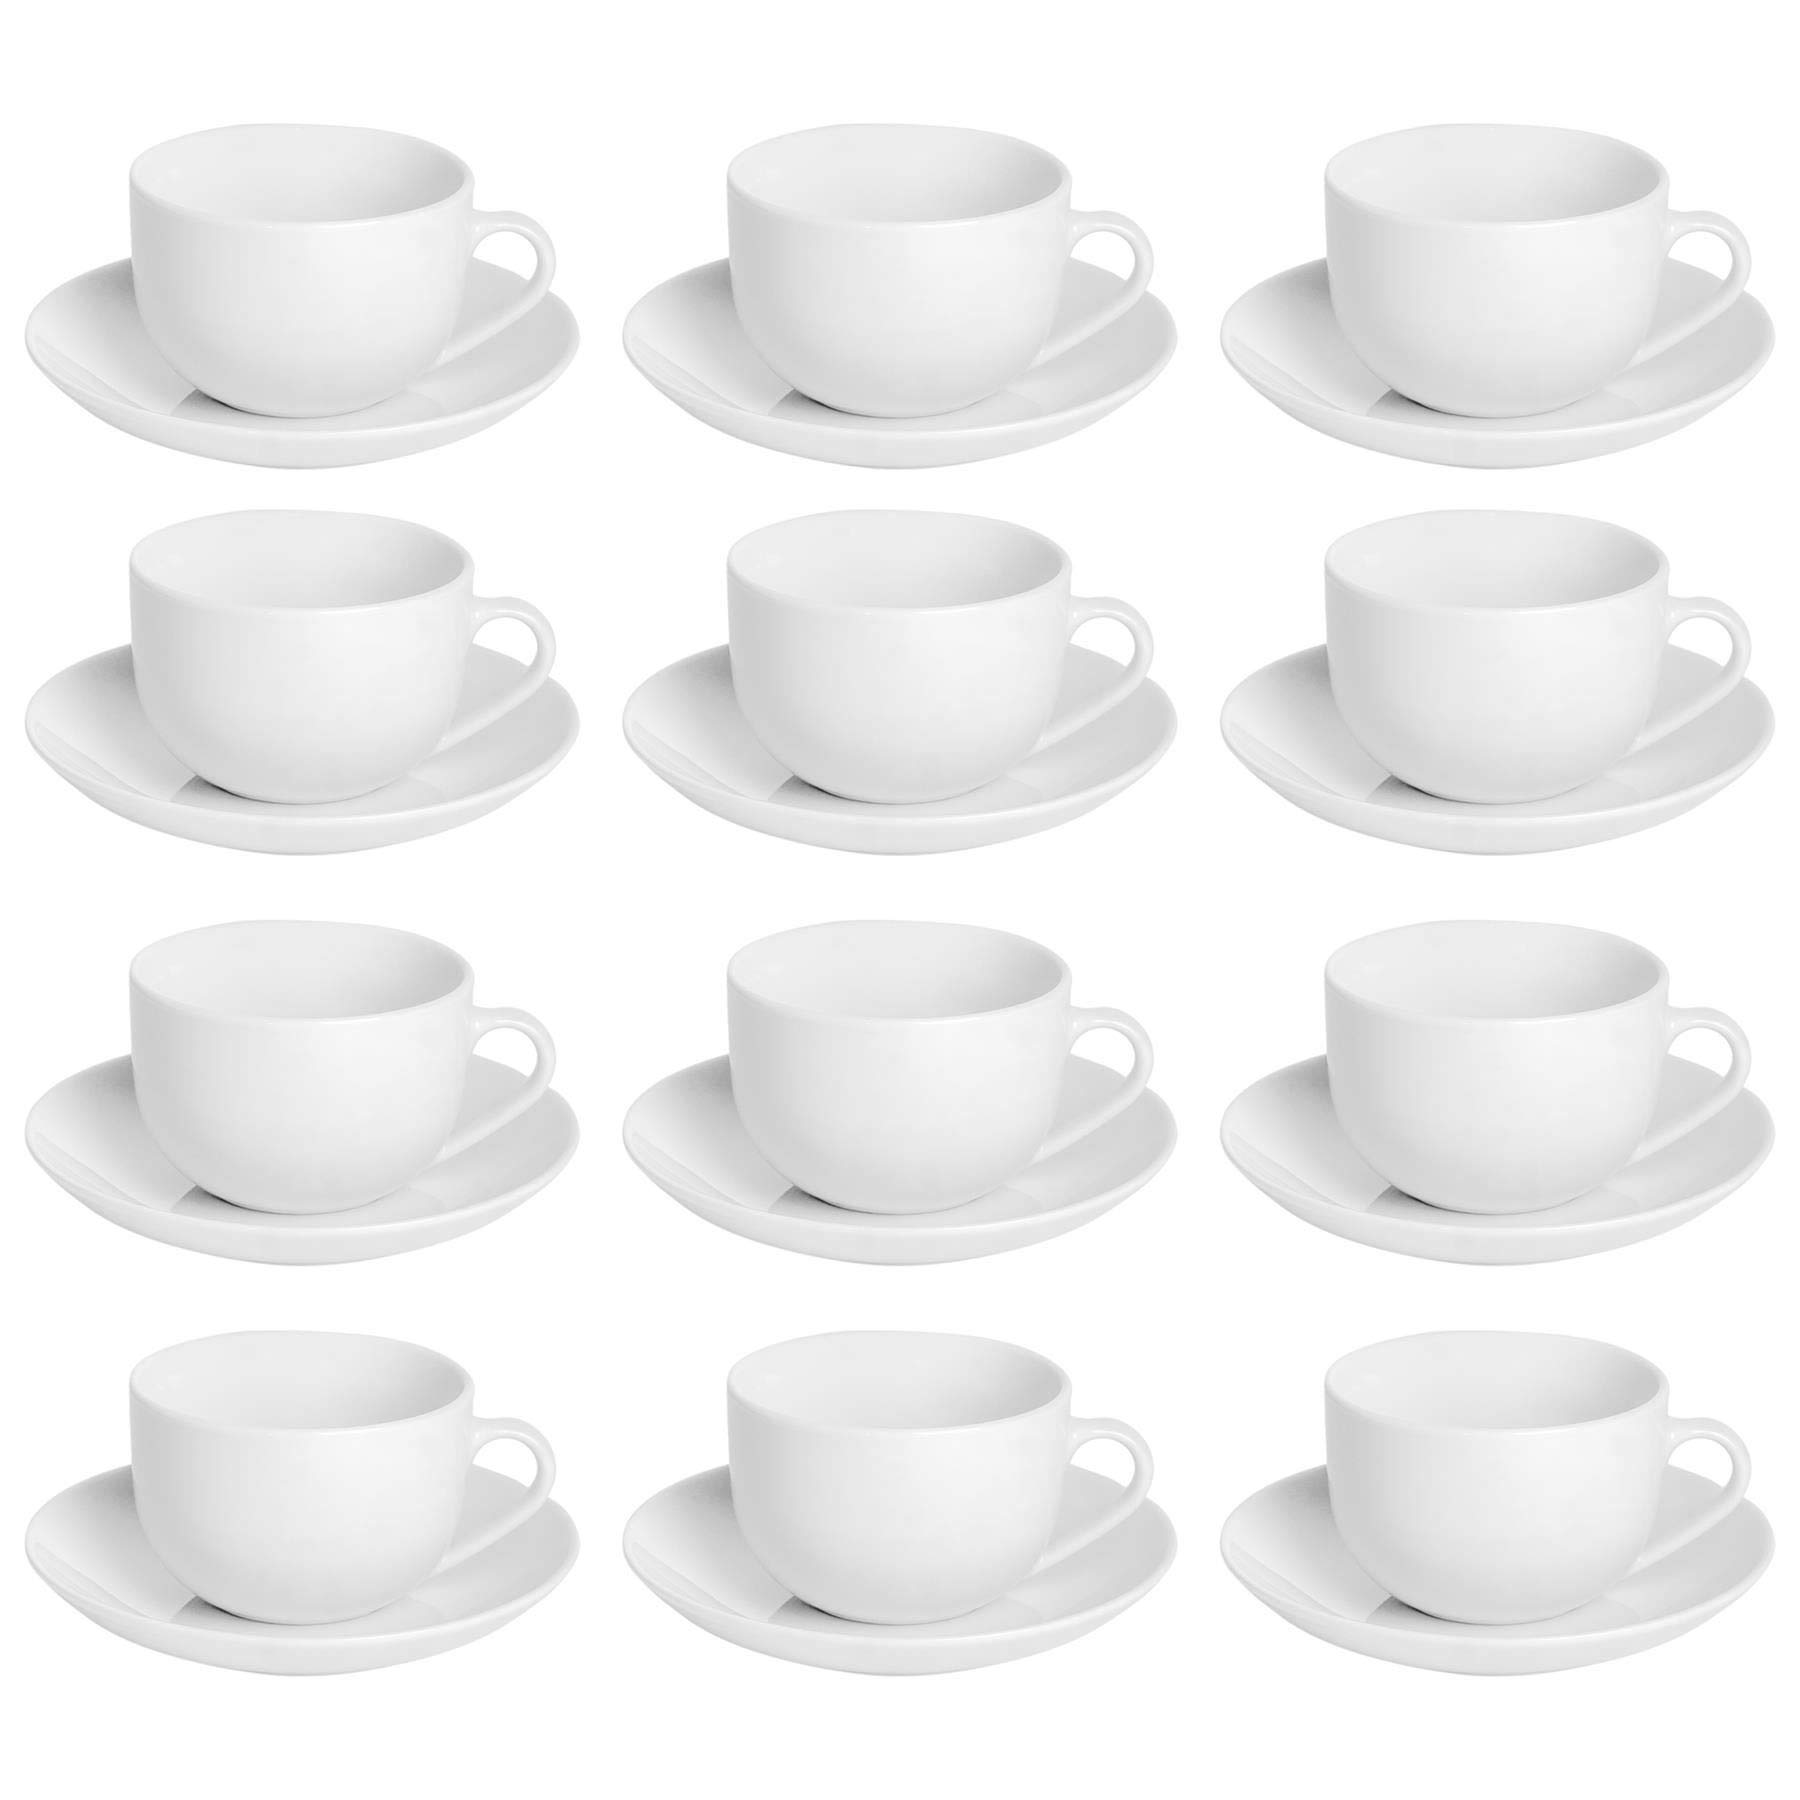 Abordable Argon Tableware 24 Piece Classic White Teacup